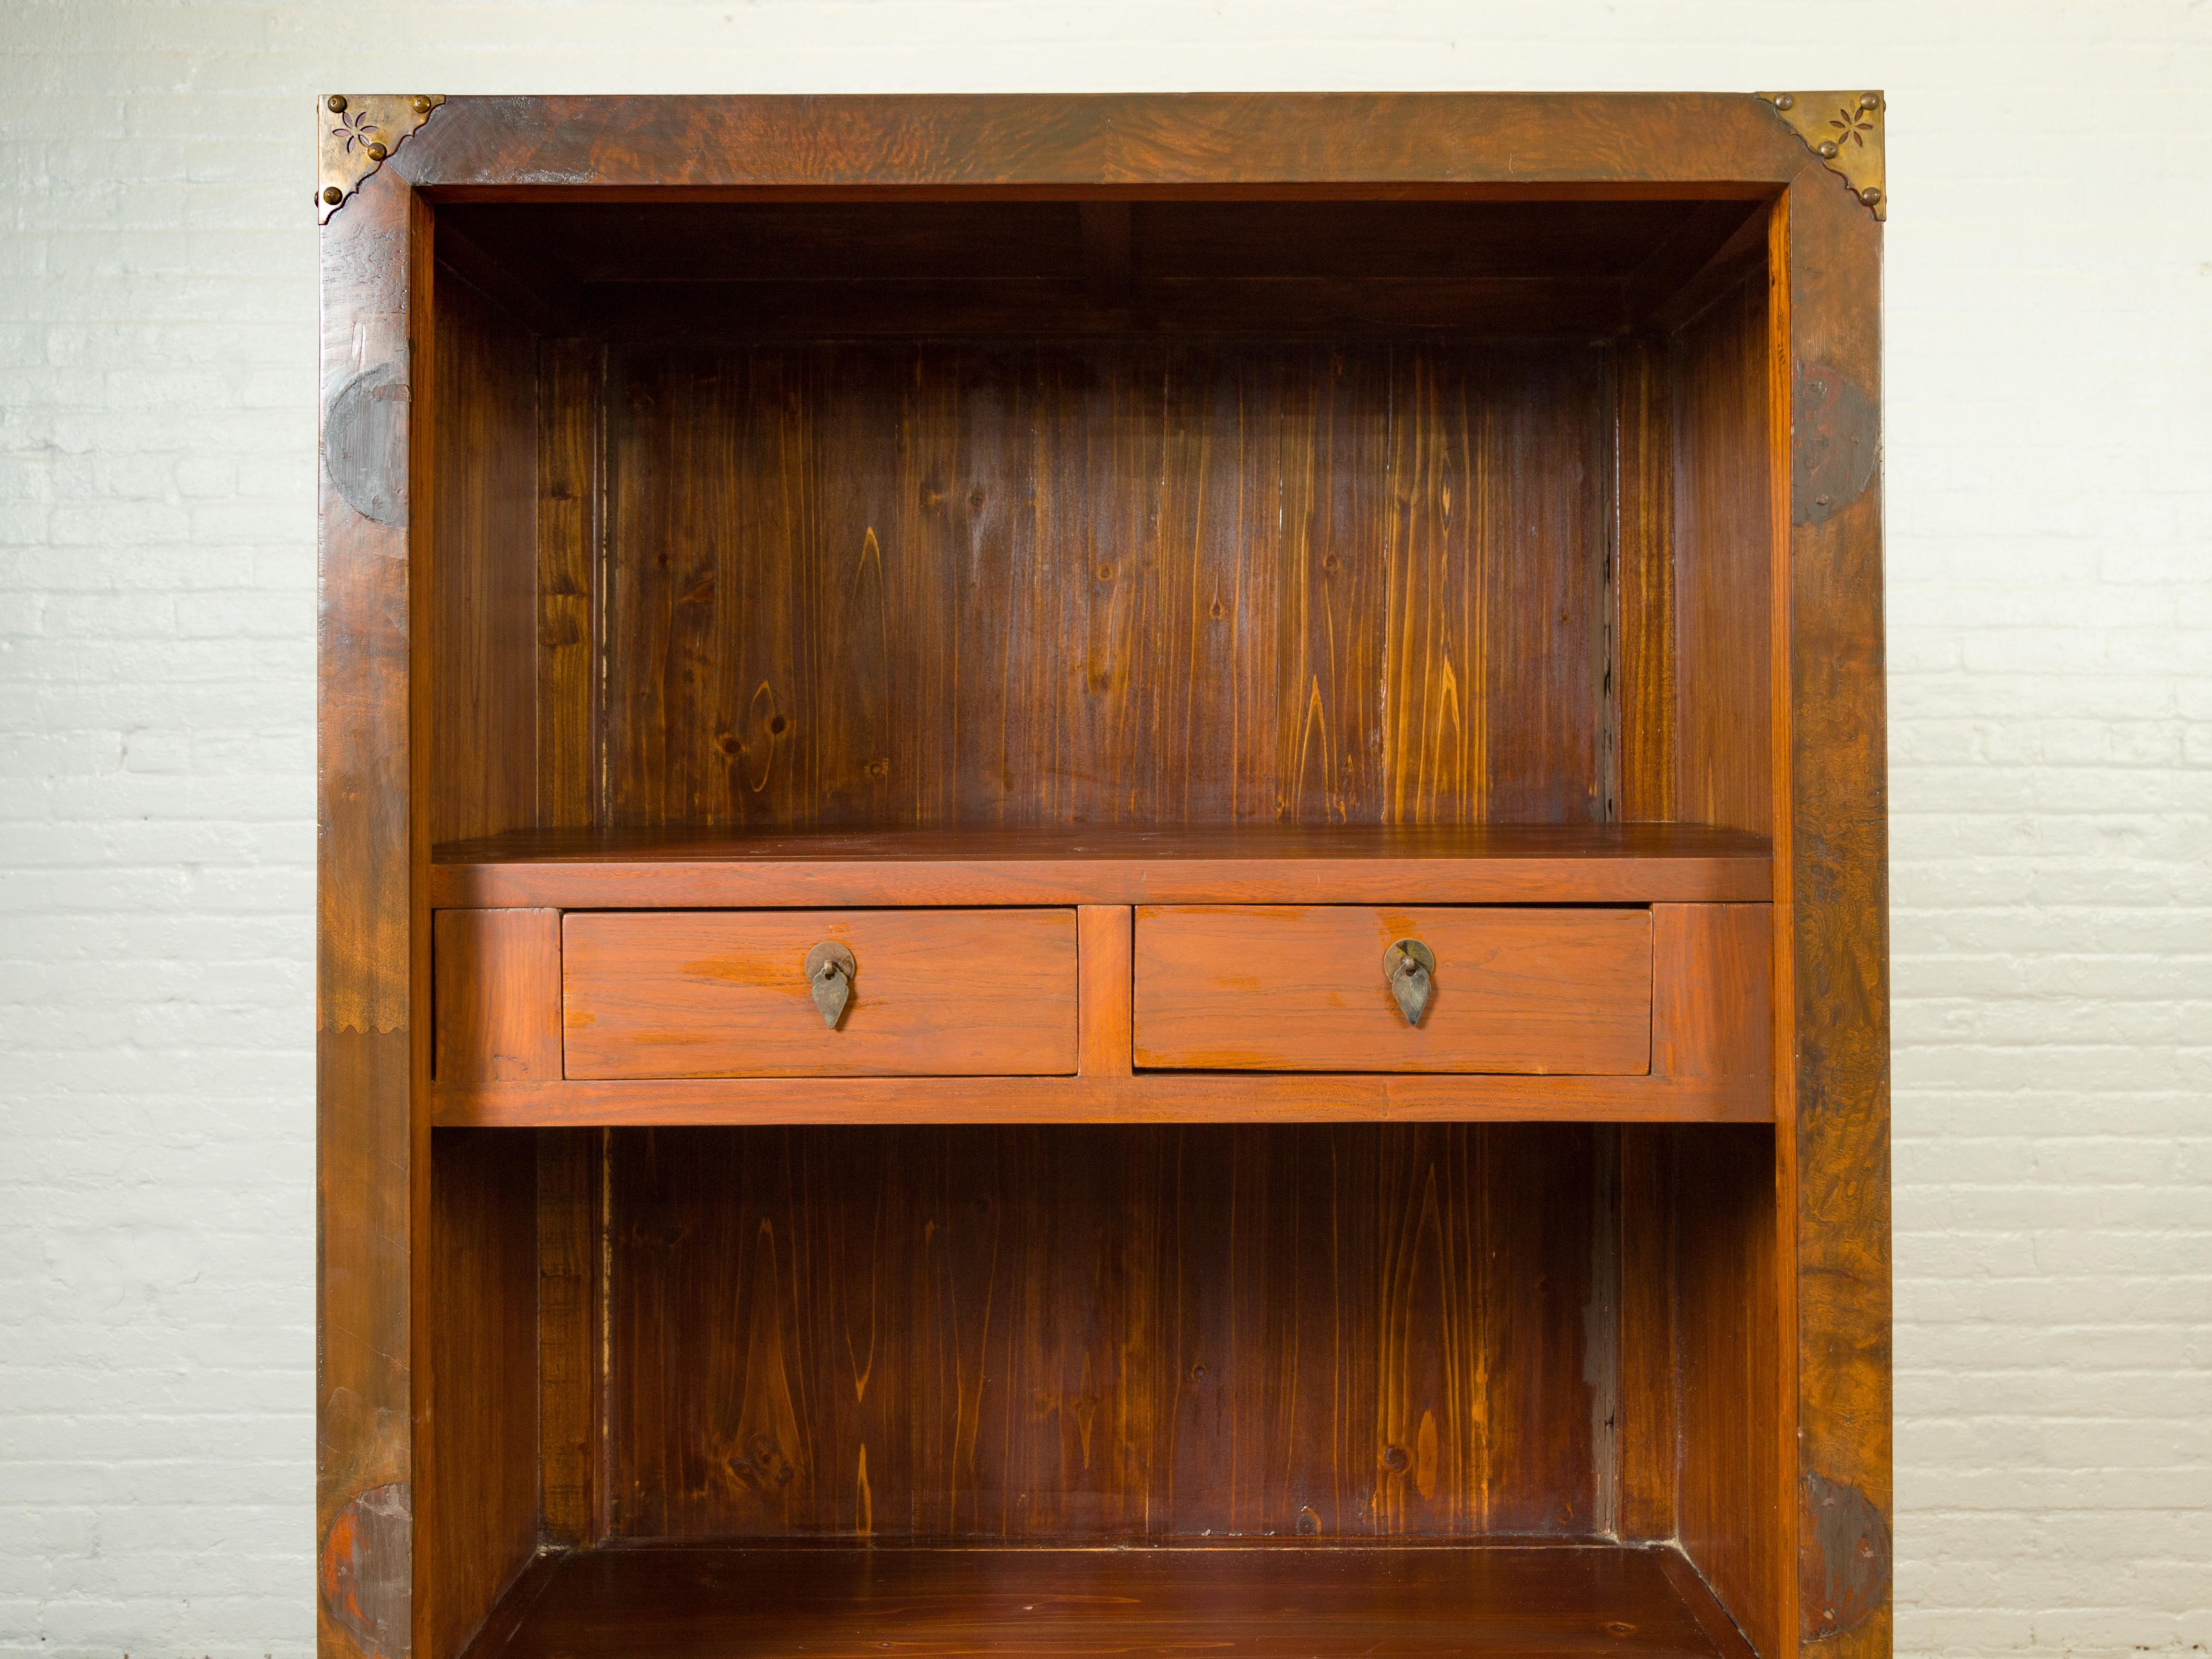 Chinese 19th Century Elmwood Bookcase with Doors, Drawers and Brass Hardware In Good Condition For Sale In Yonkers, NY